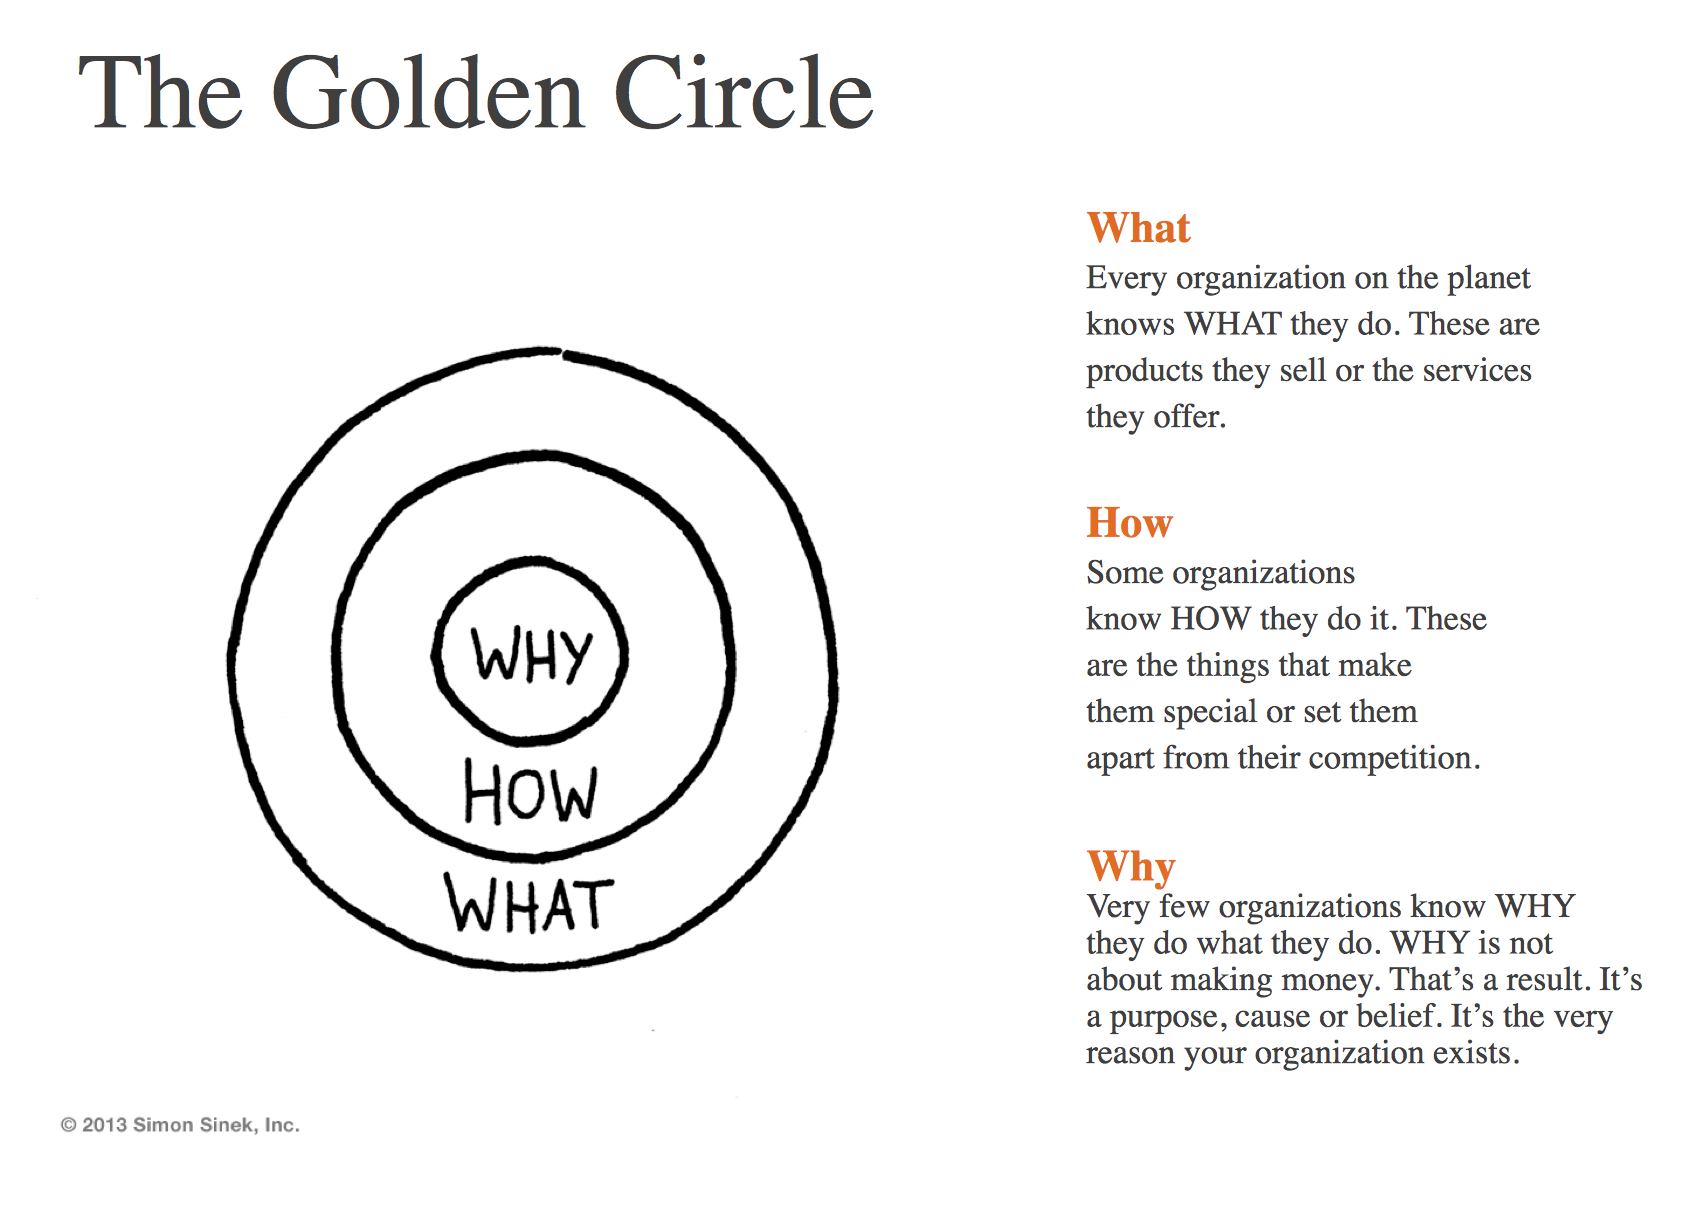 Simon Sinek’s “The Golden Circle” showing three circles. The innermost circle has “why,” the middle circle has “how,” and the outermost circle has “what.”